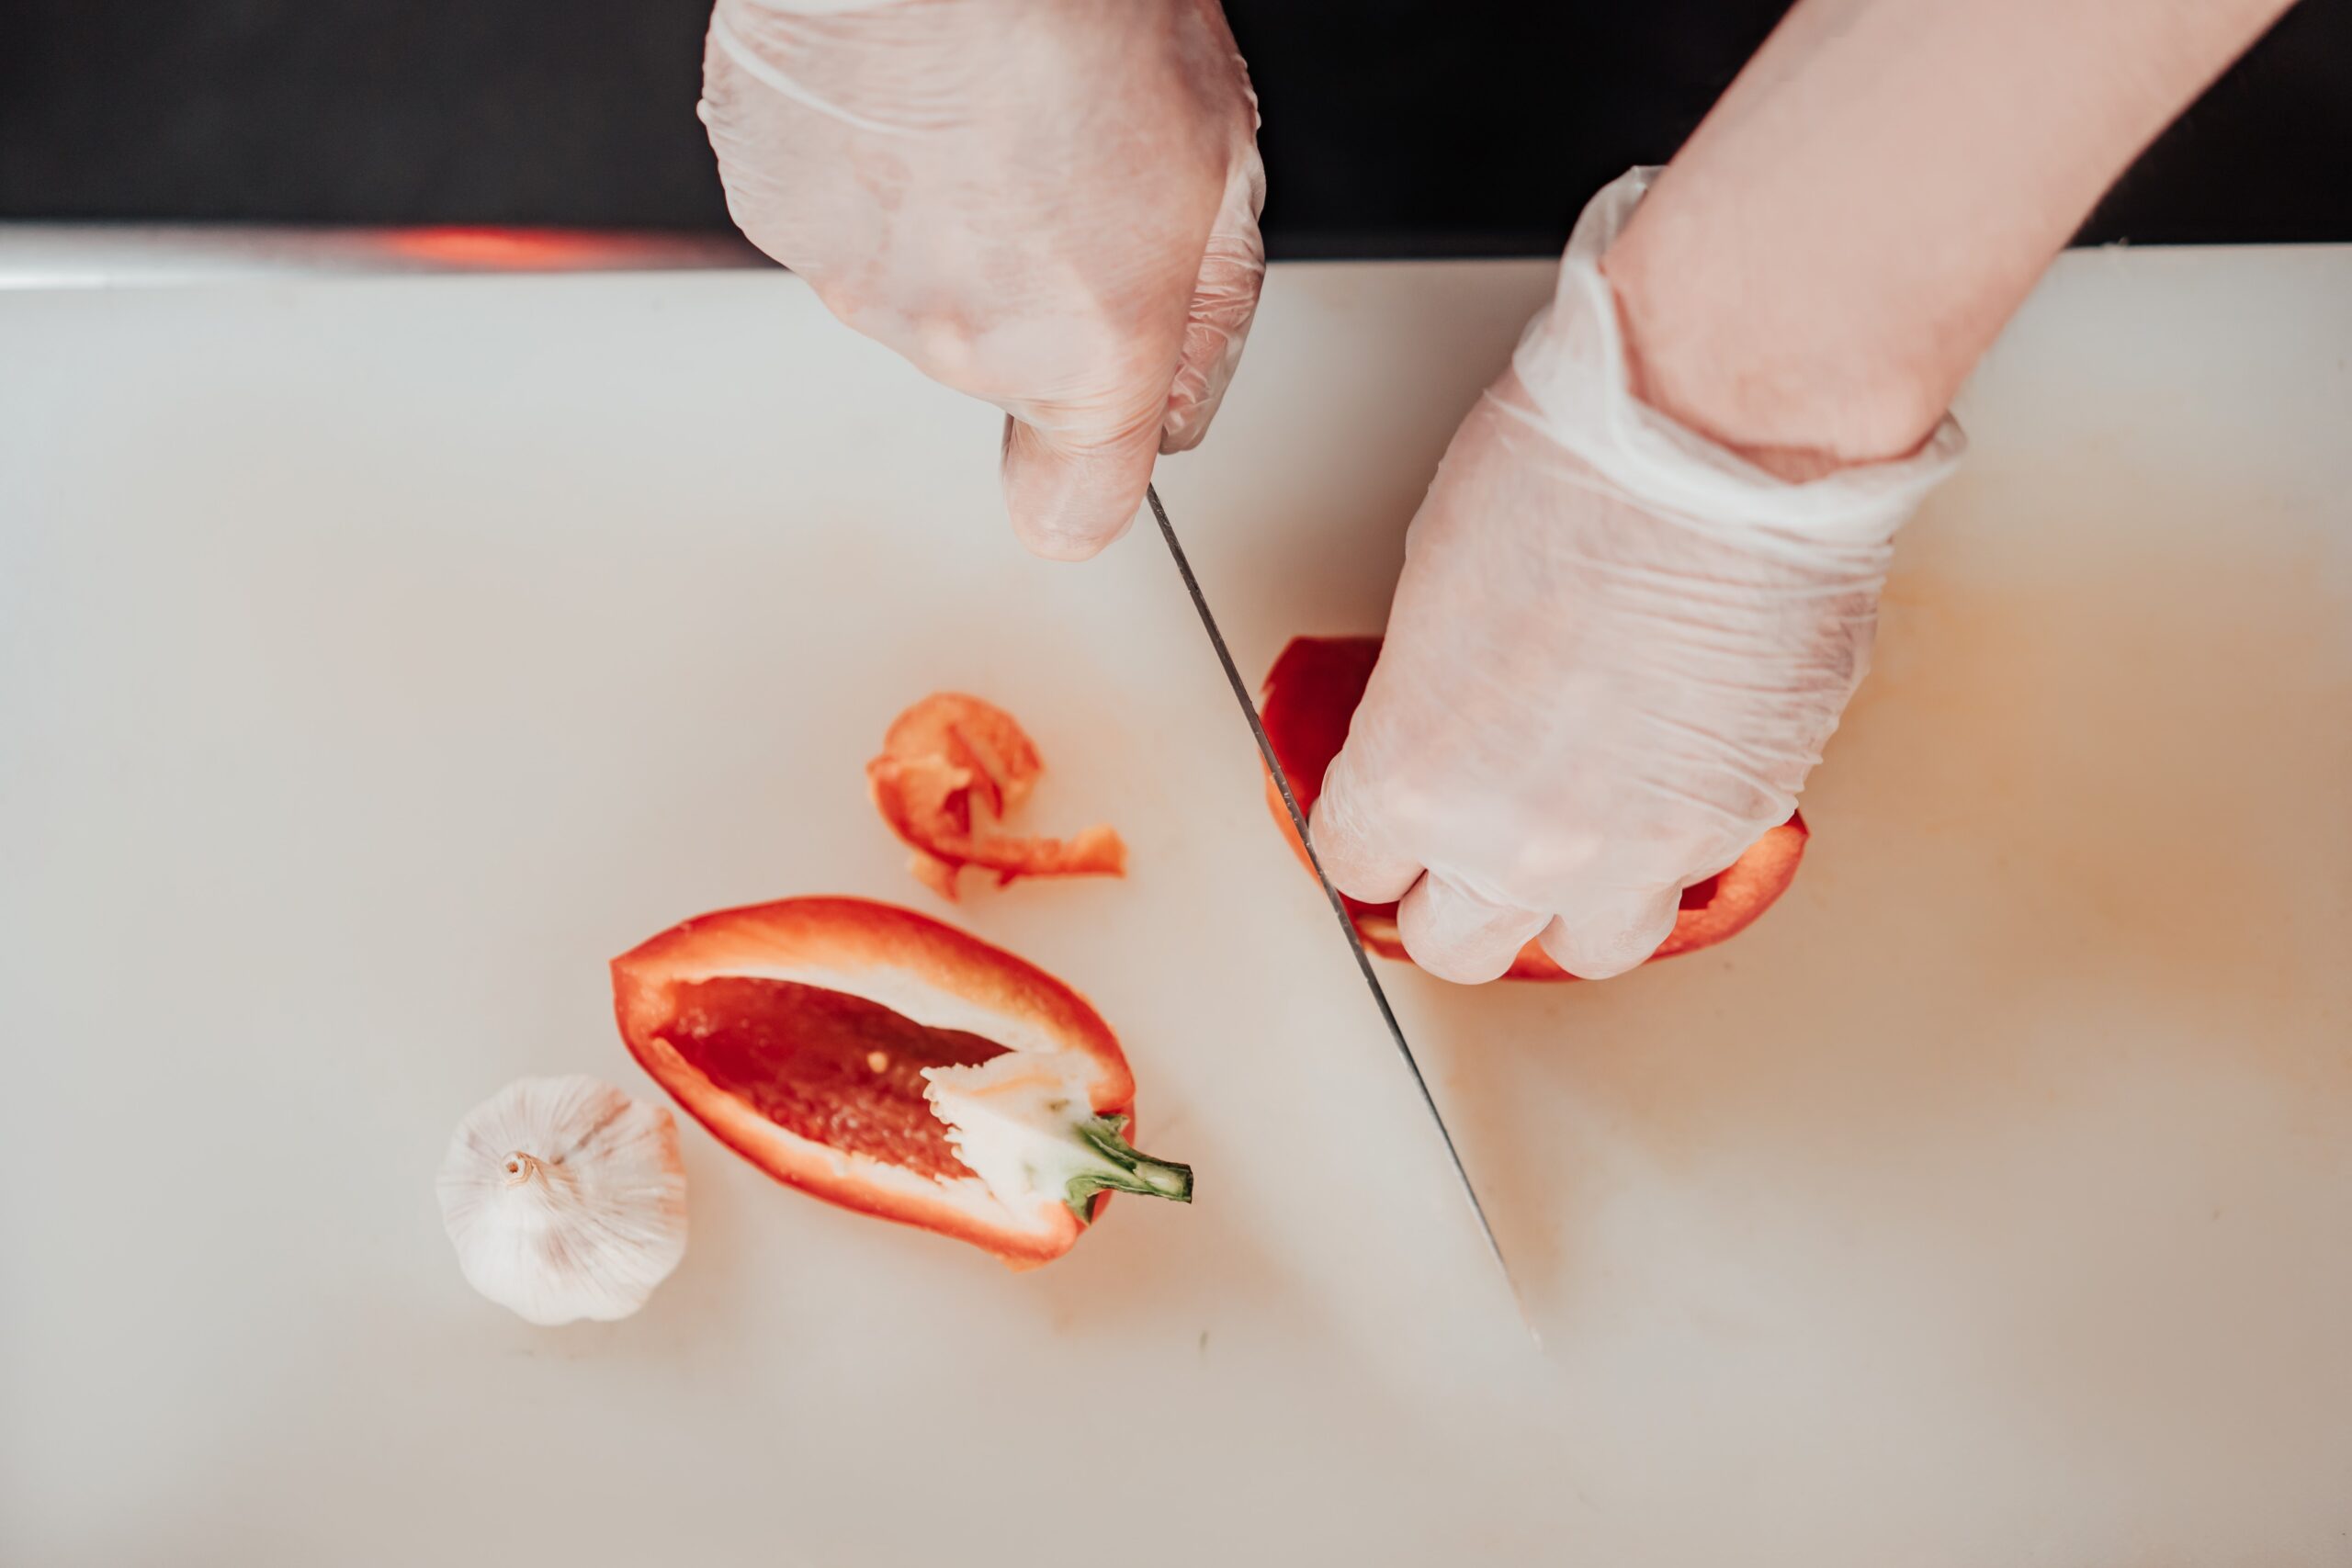 A view of hands cutting up a pepper.